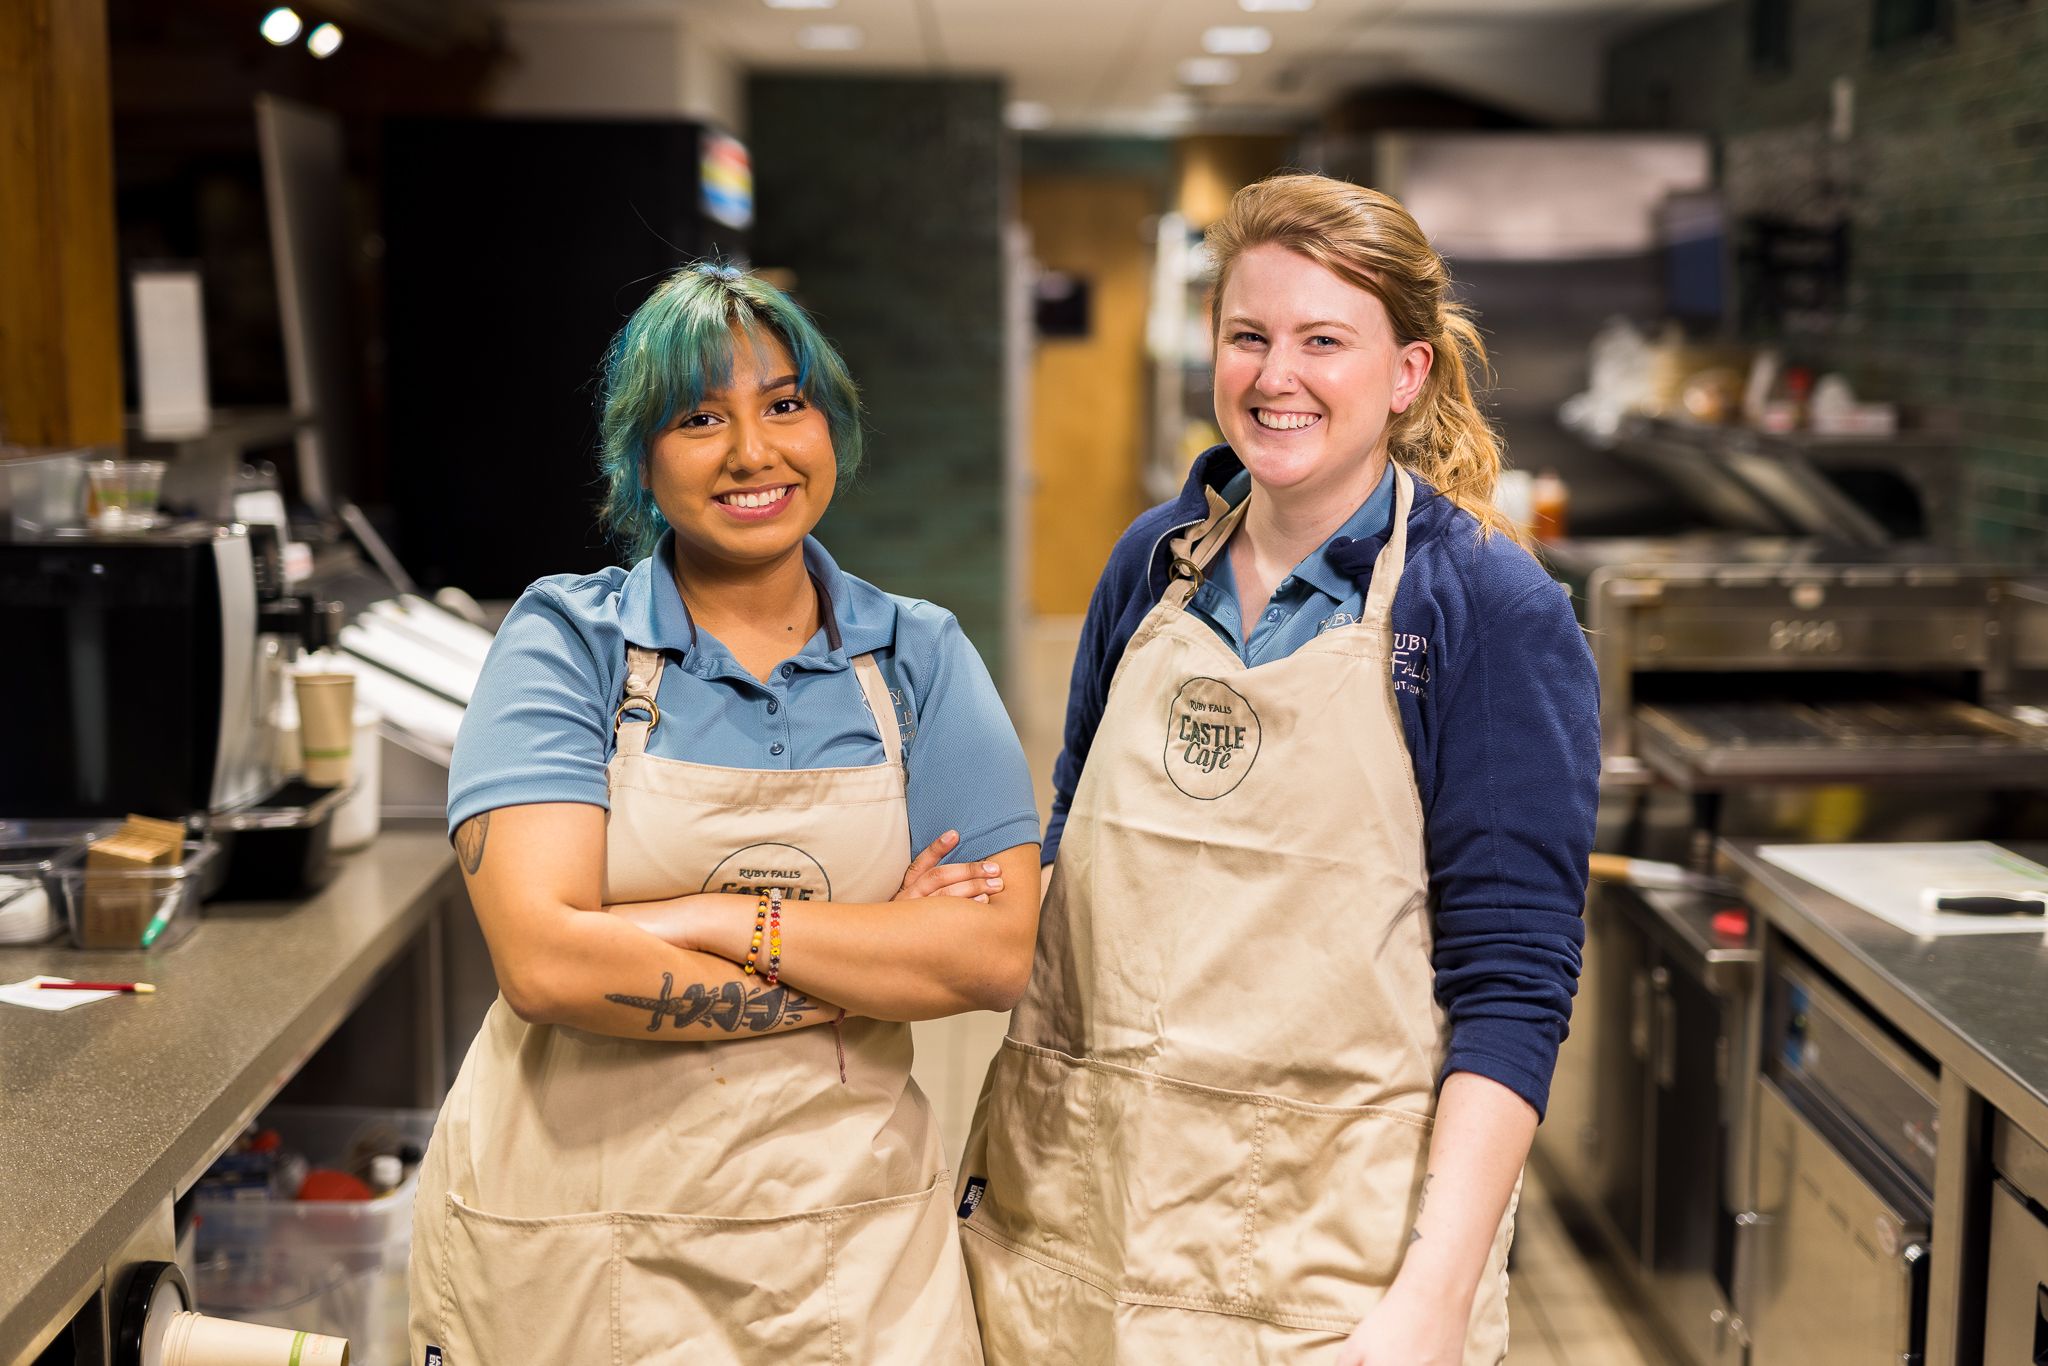 Two kitchen employees smile at the camera